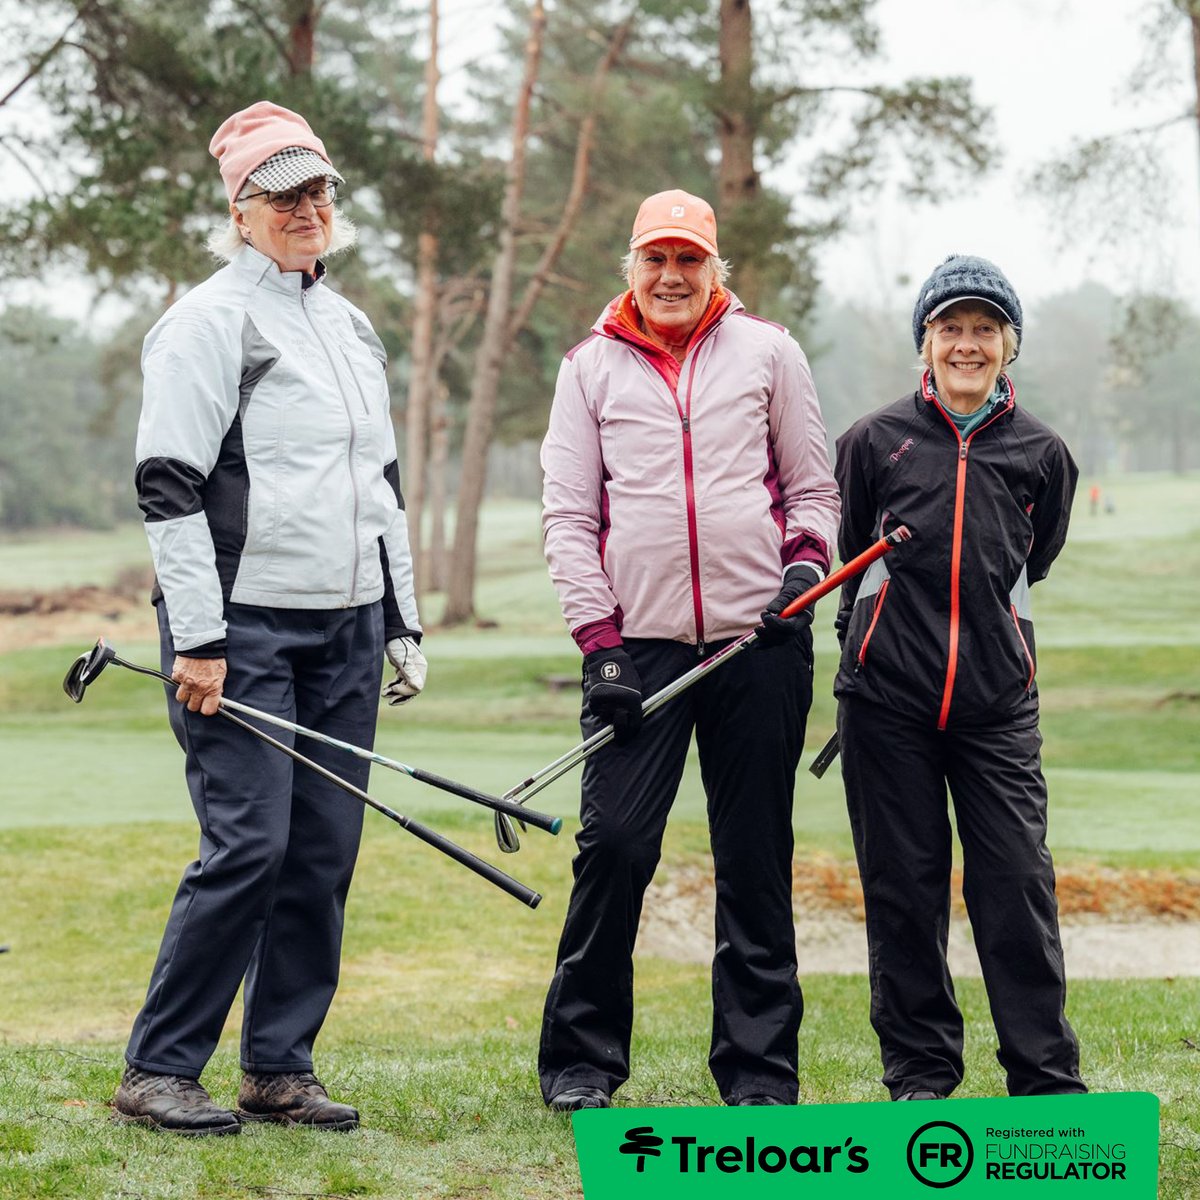 We are looking back at the success of last year's Charity Golf Day during which we raised over £11,000! Your incredible support made it possible! Now, let's exceed that achievement together! Join us on 5 June - book your space now! treloar.org.uk/events/the-tre…